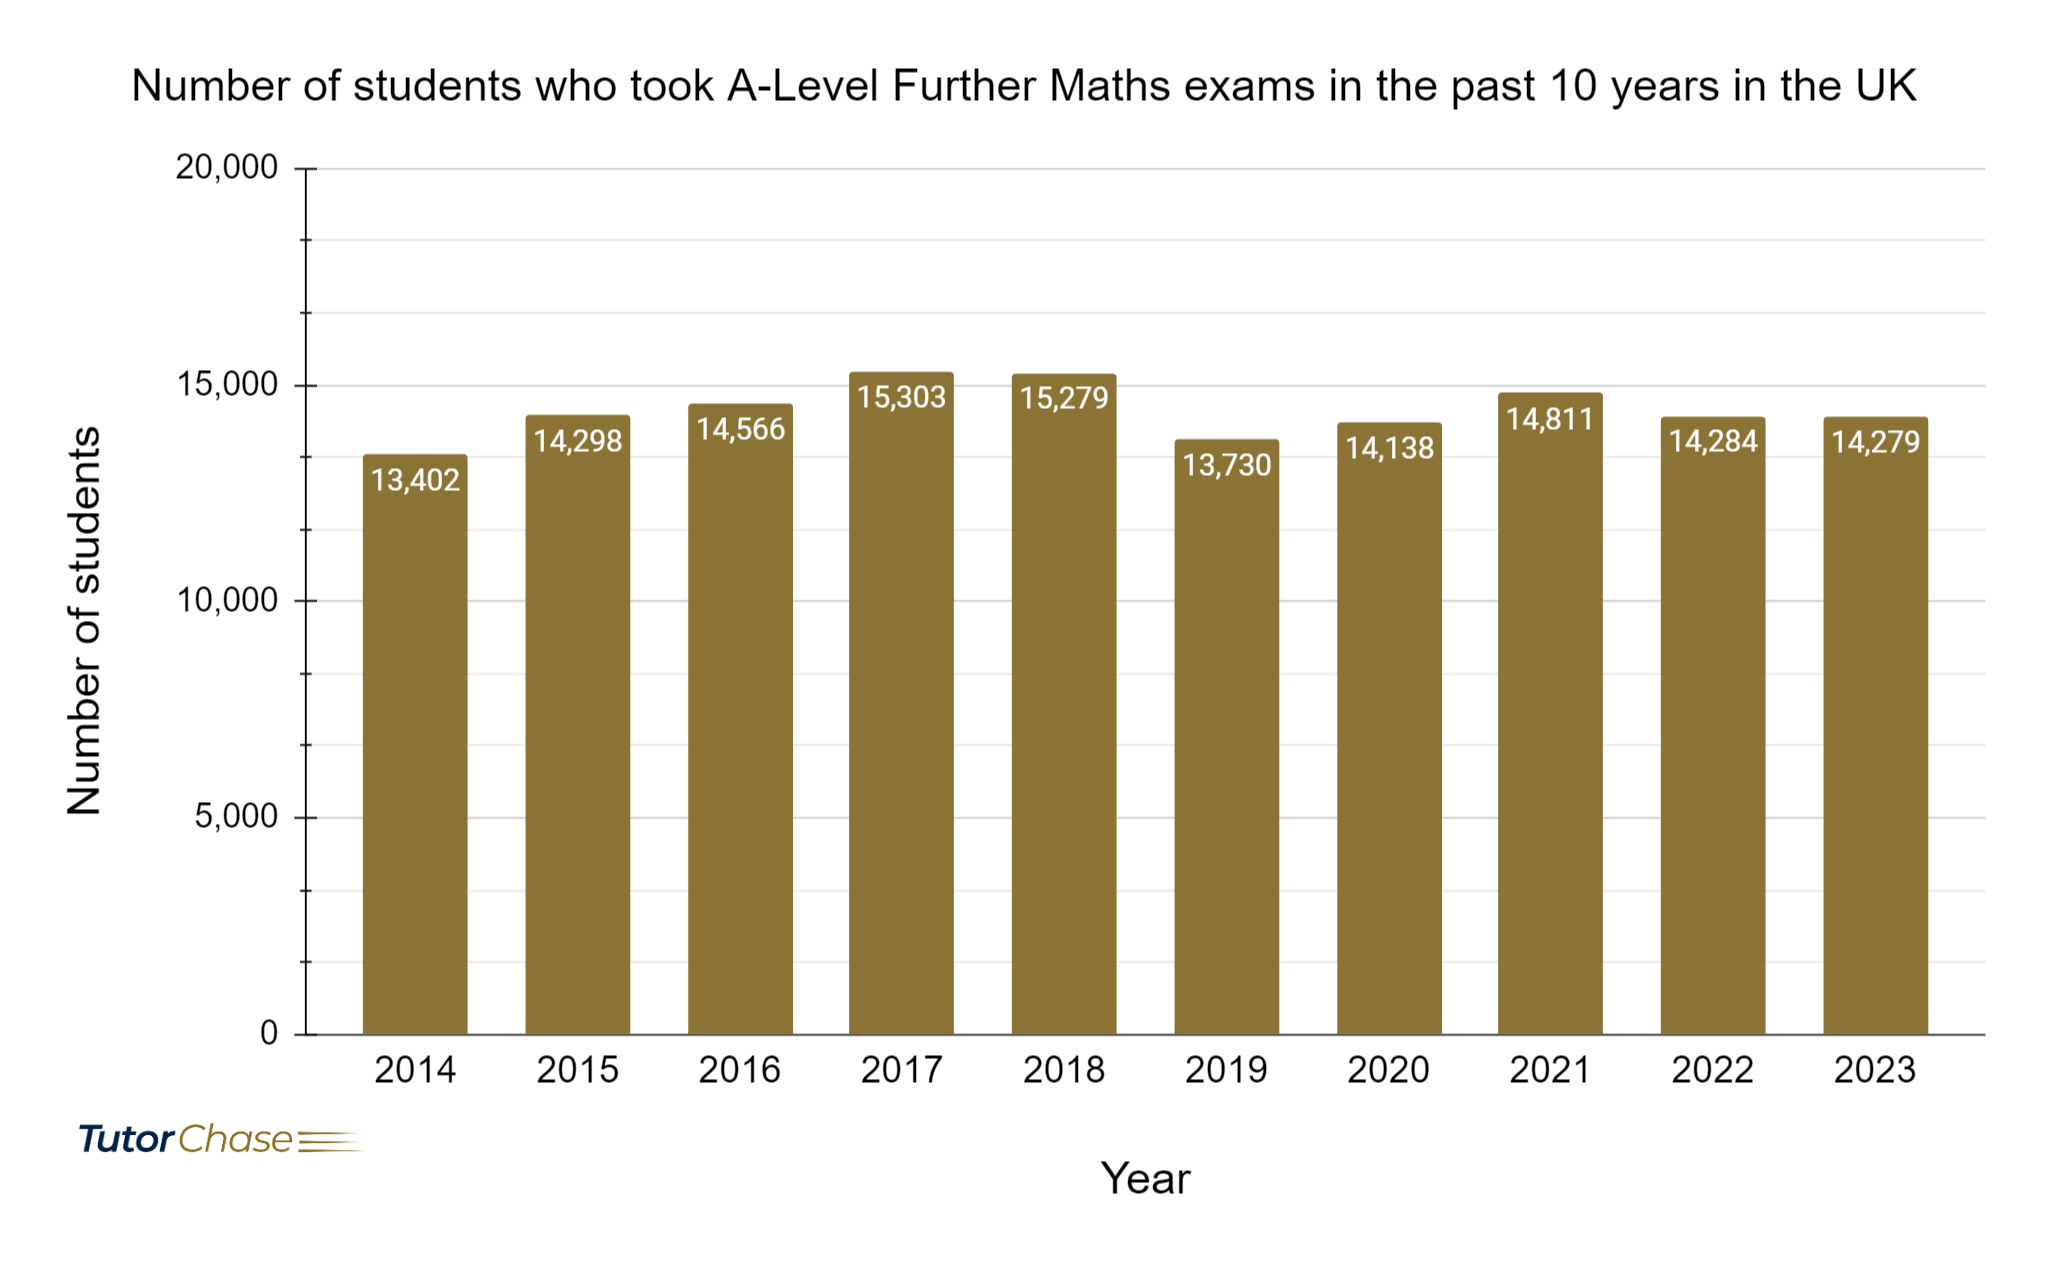 Number of students who took A-Level Further Maths exams in the past 10 years